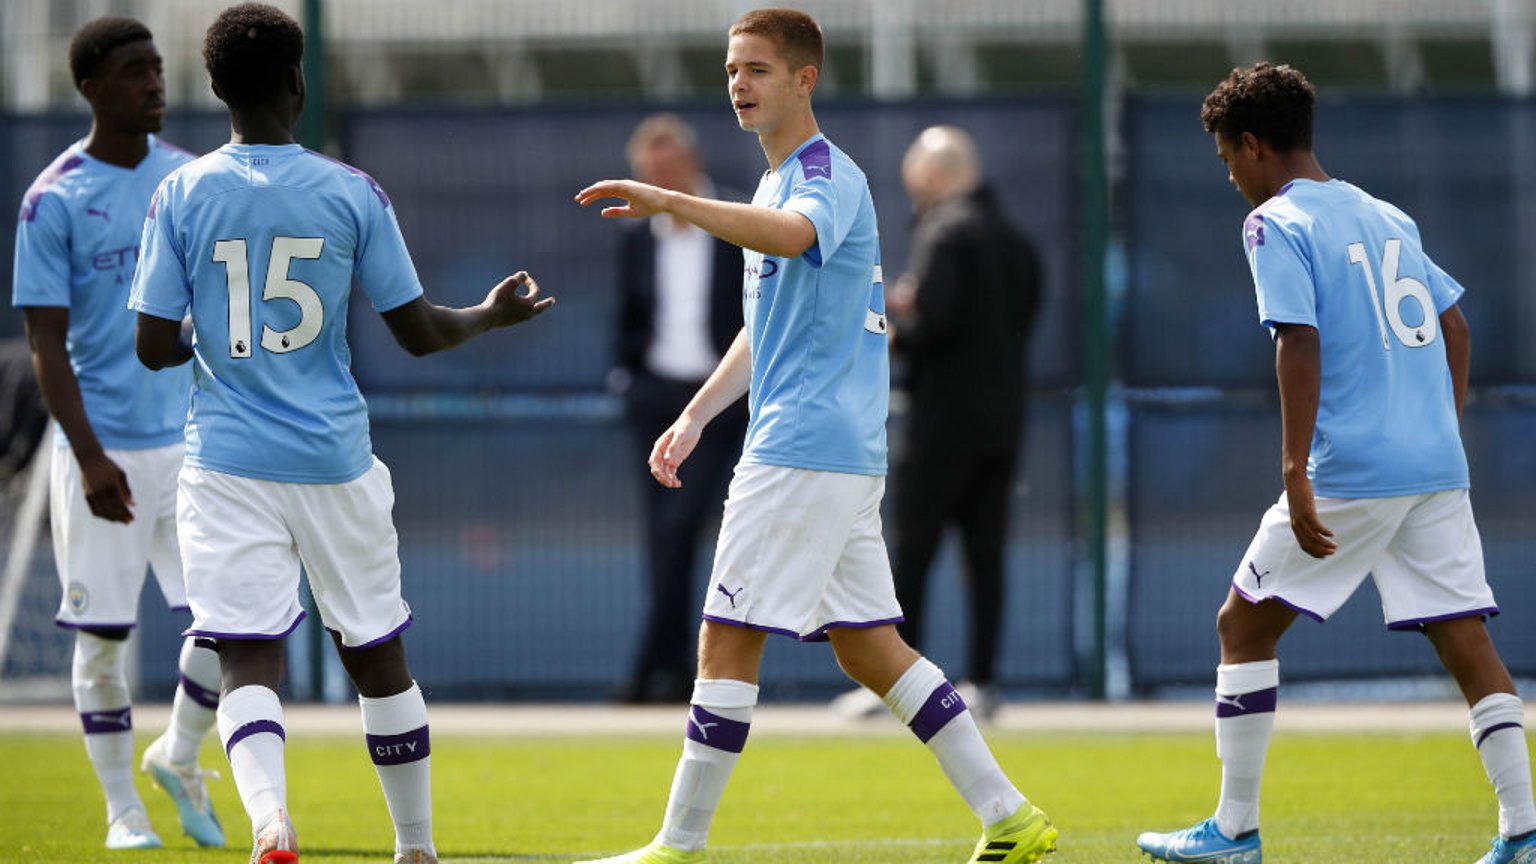 REPORT: City's U18s enjoyed a fine win over Newcastle